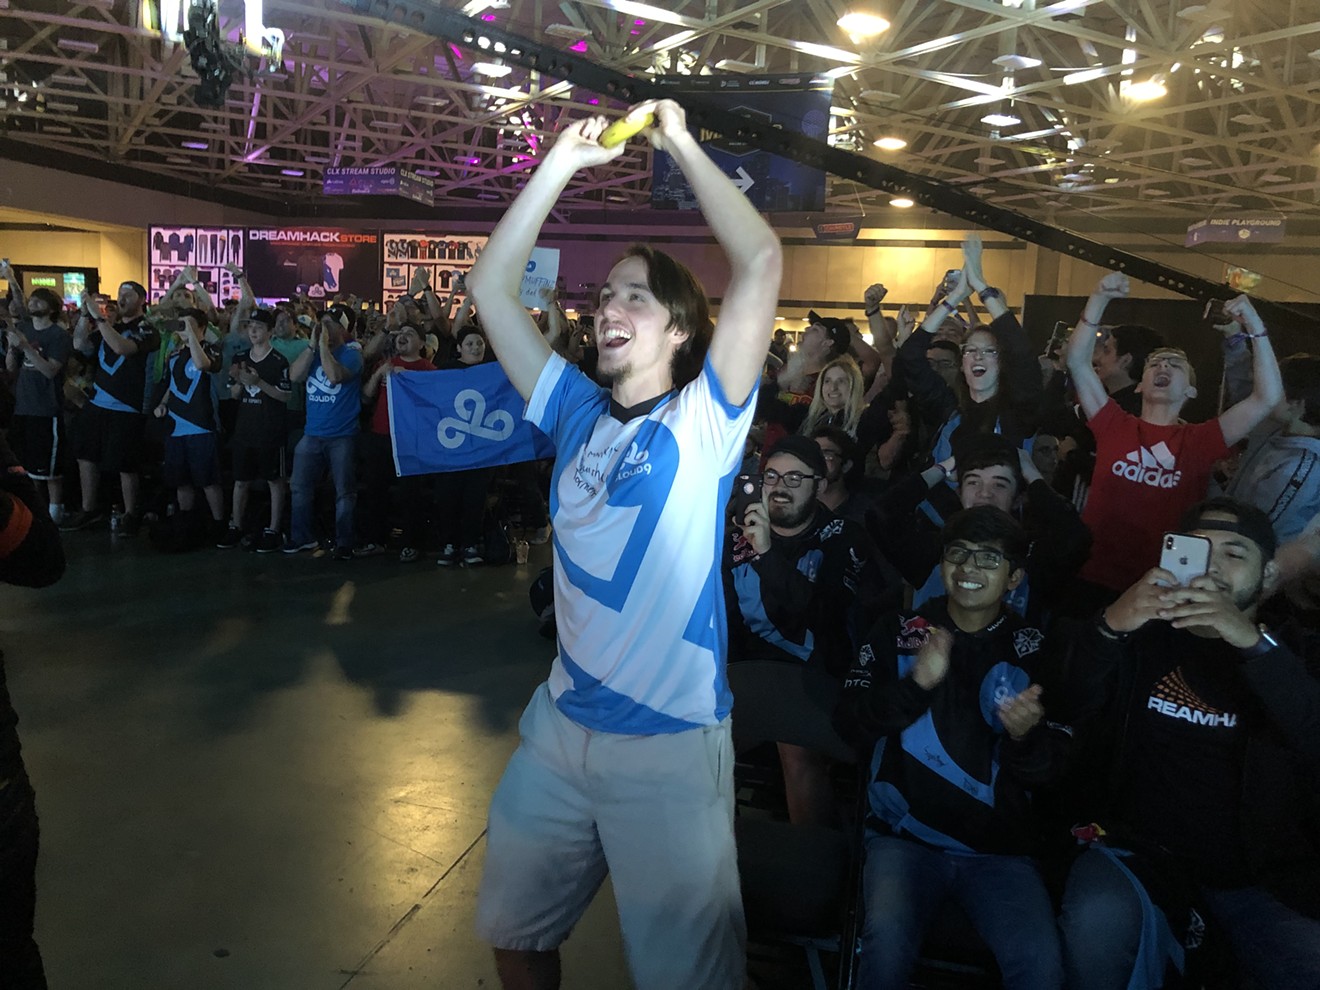 John "Reso" Nabergall of Houston celebrates Cloud9's win over TSM in the DreamHack Masters tournament for Rocket League at the DreamHack con.